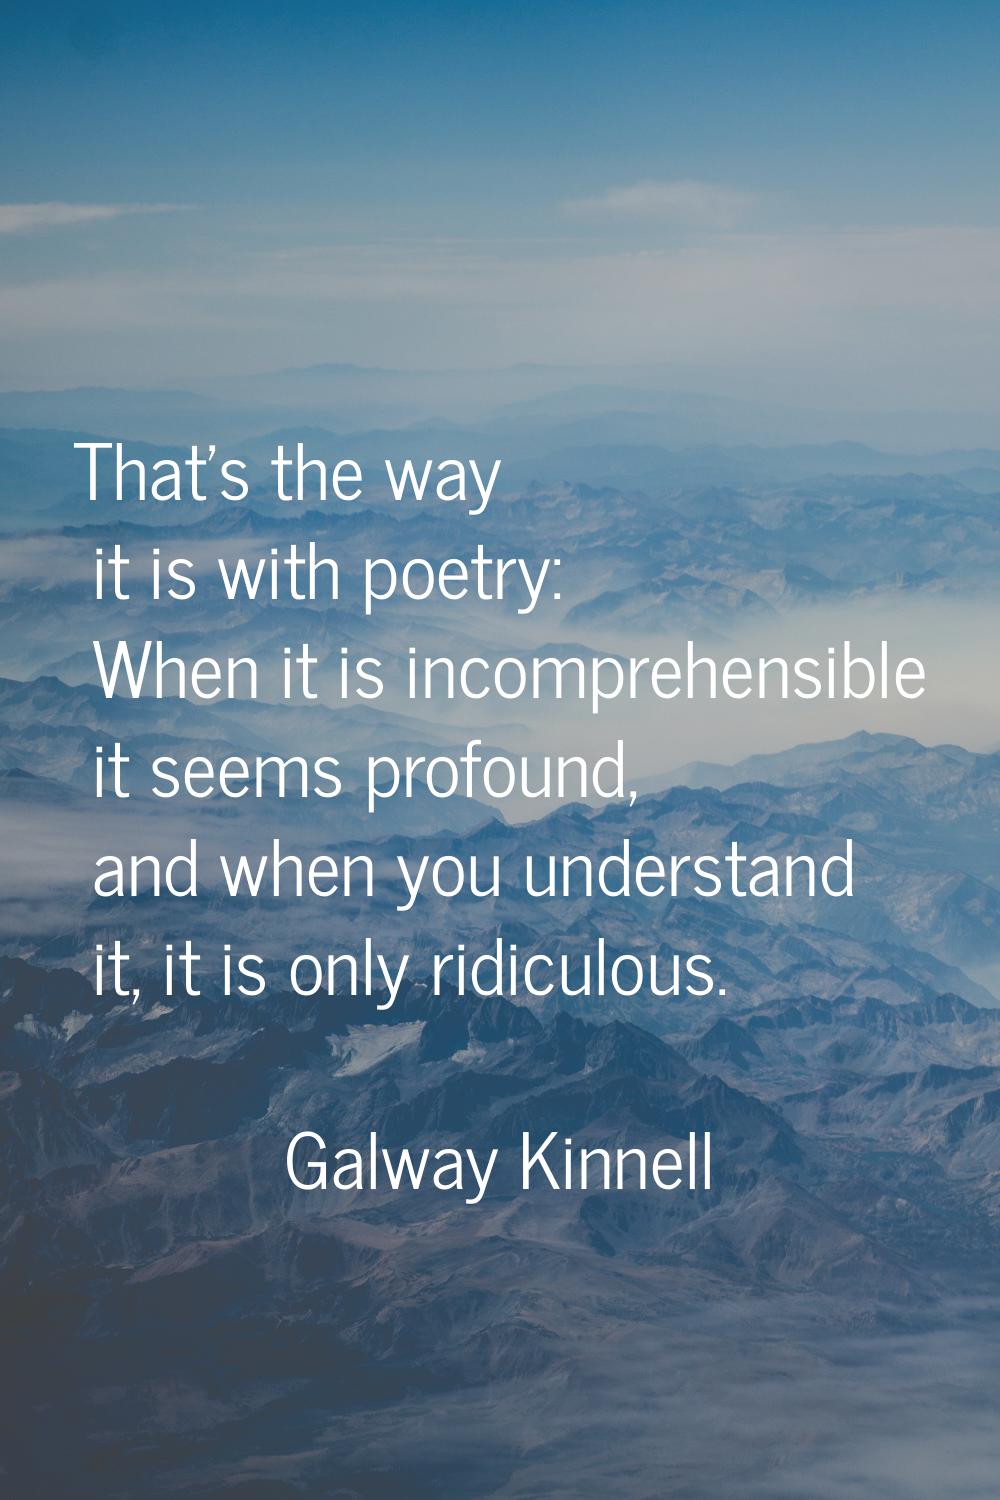 That's the way it is with poetry: When it is incomprehensible it seems profound, and when you under